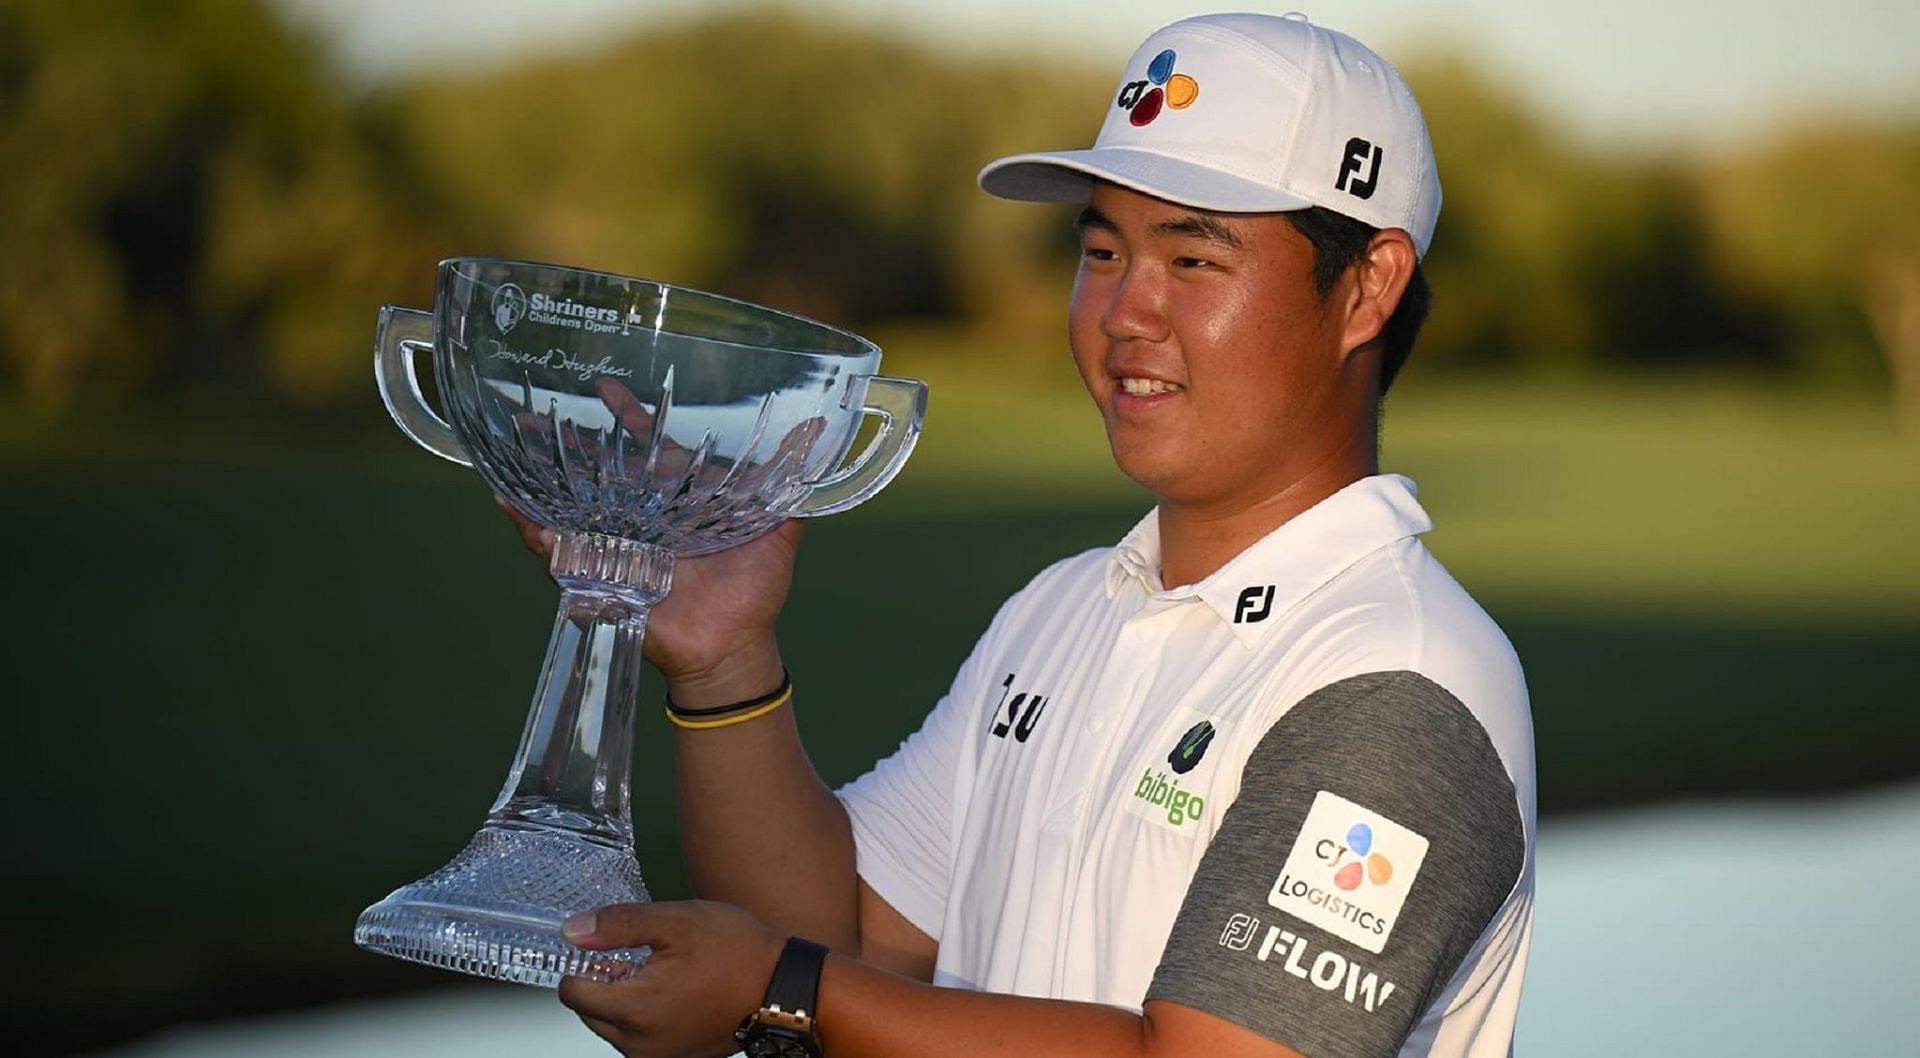 Tom Kim is the defending champion at the 2023 Shriners Children